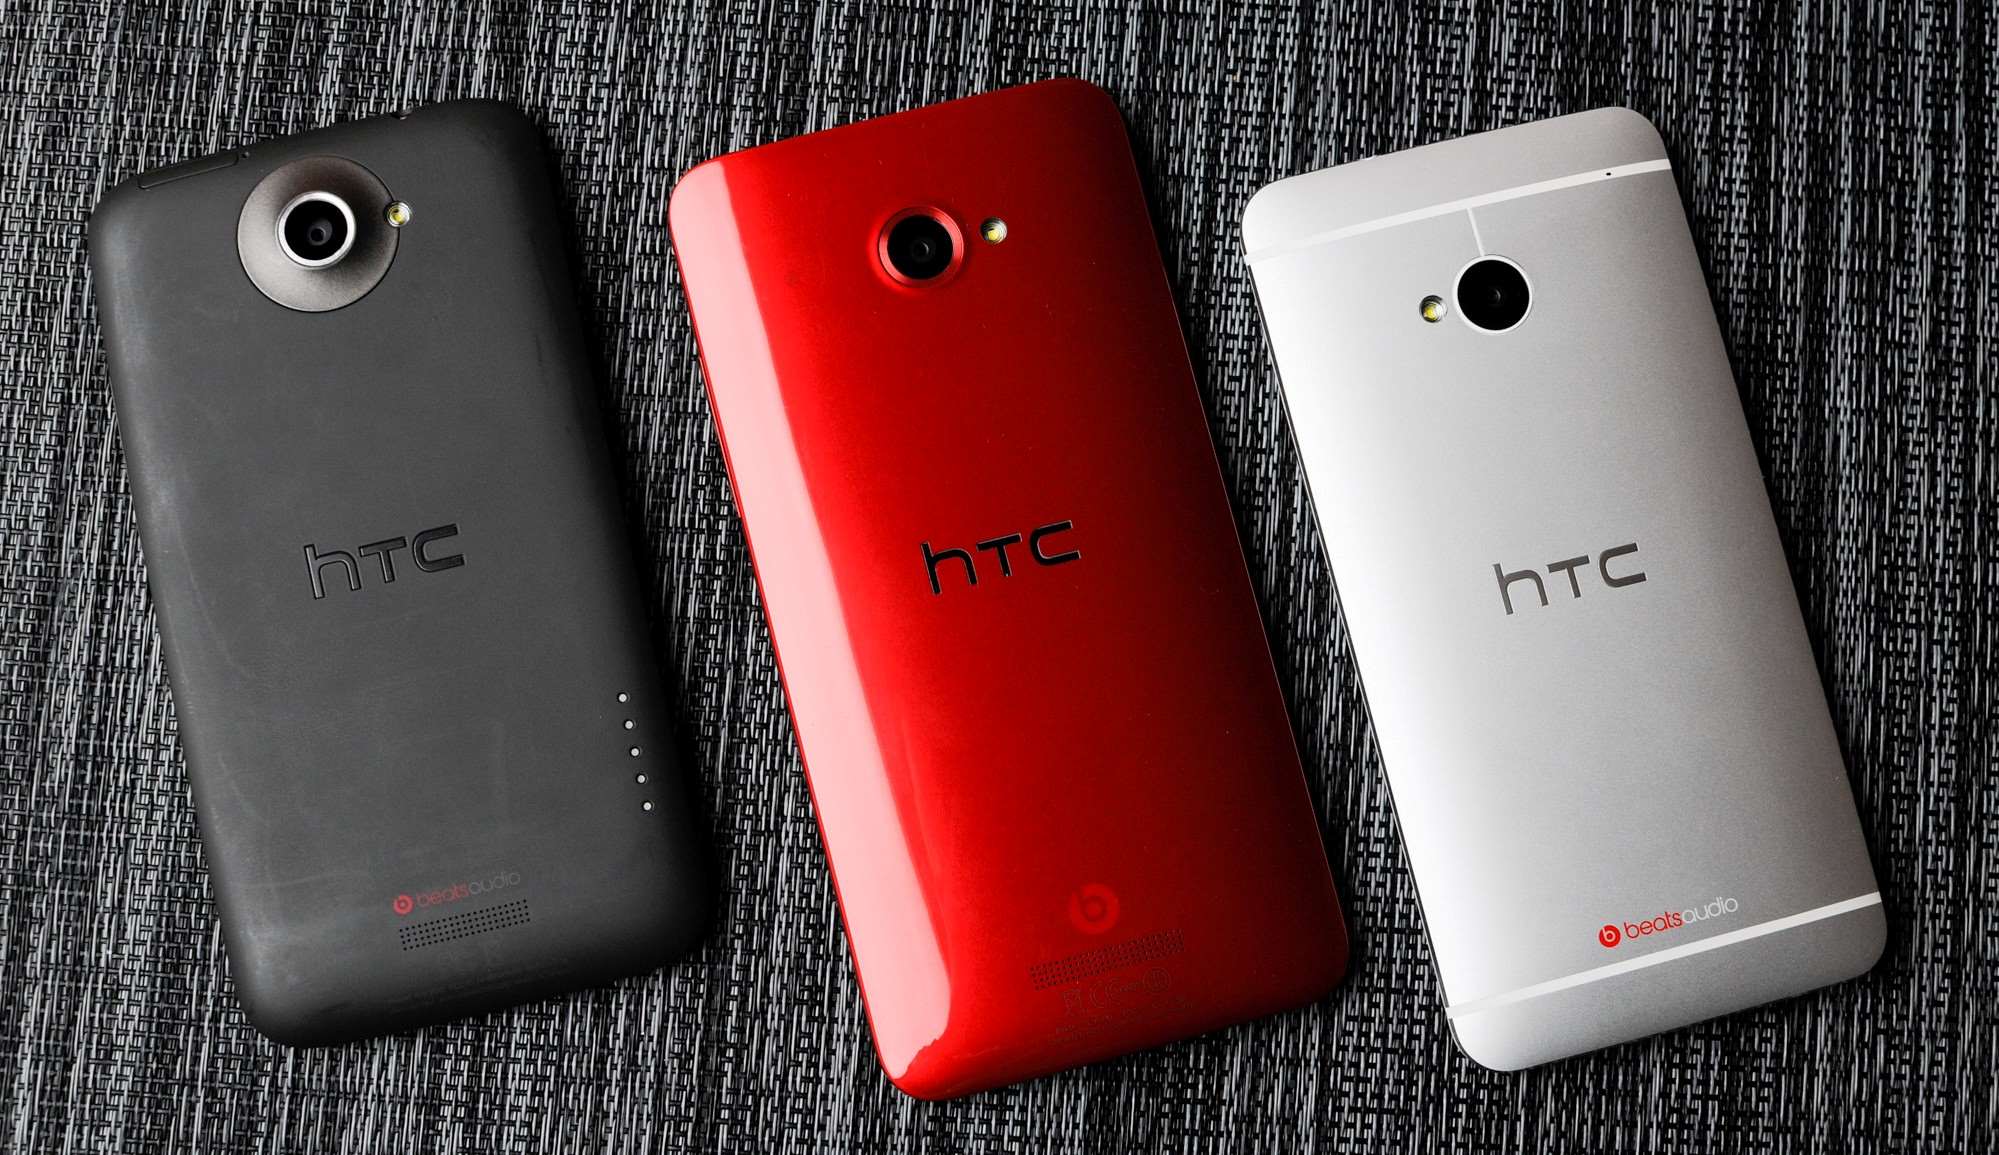 htc-one-phones-what-you-need-to-know